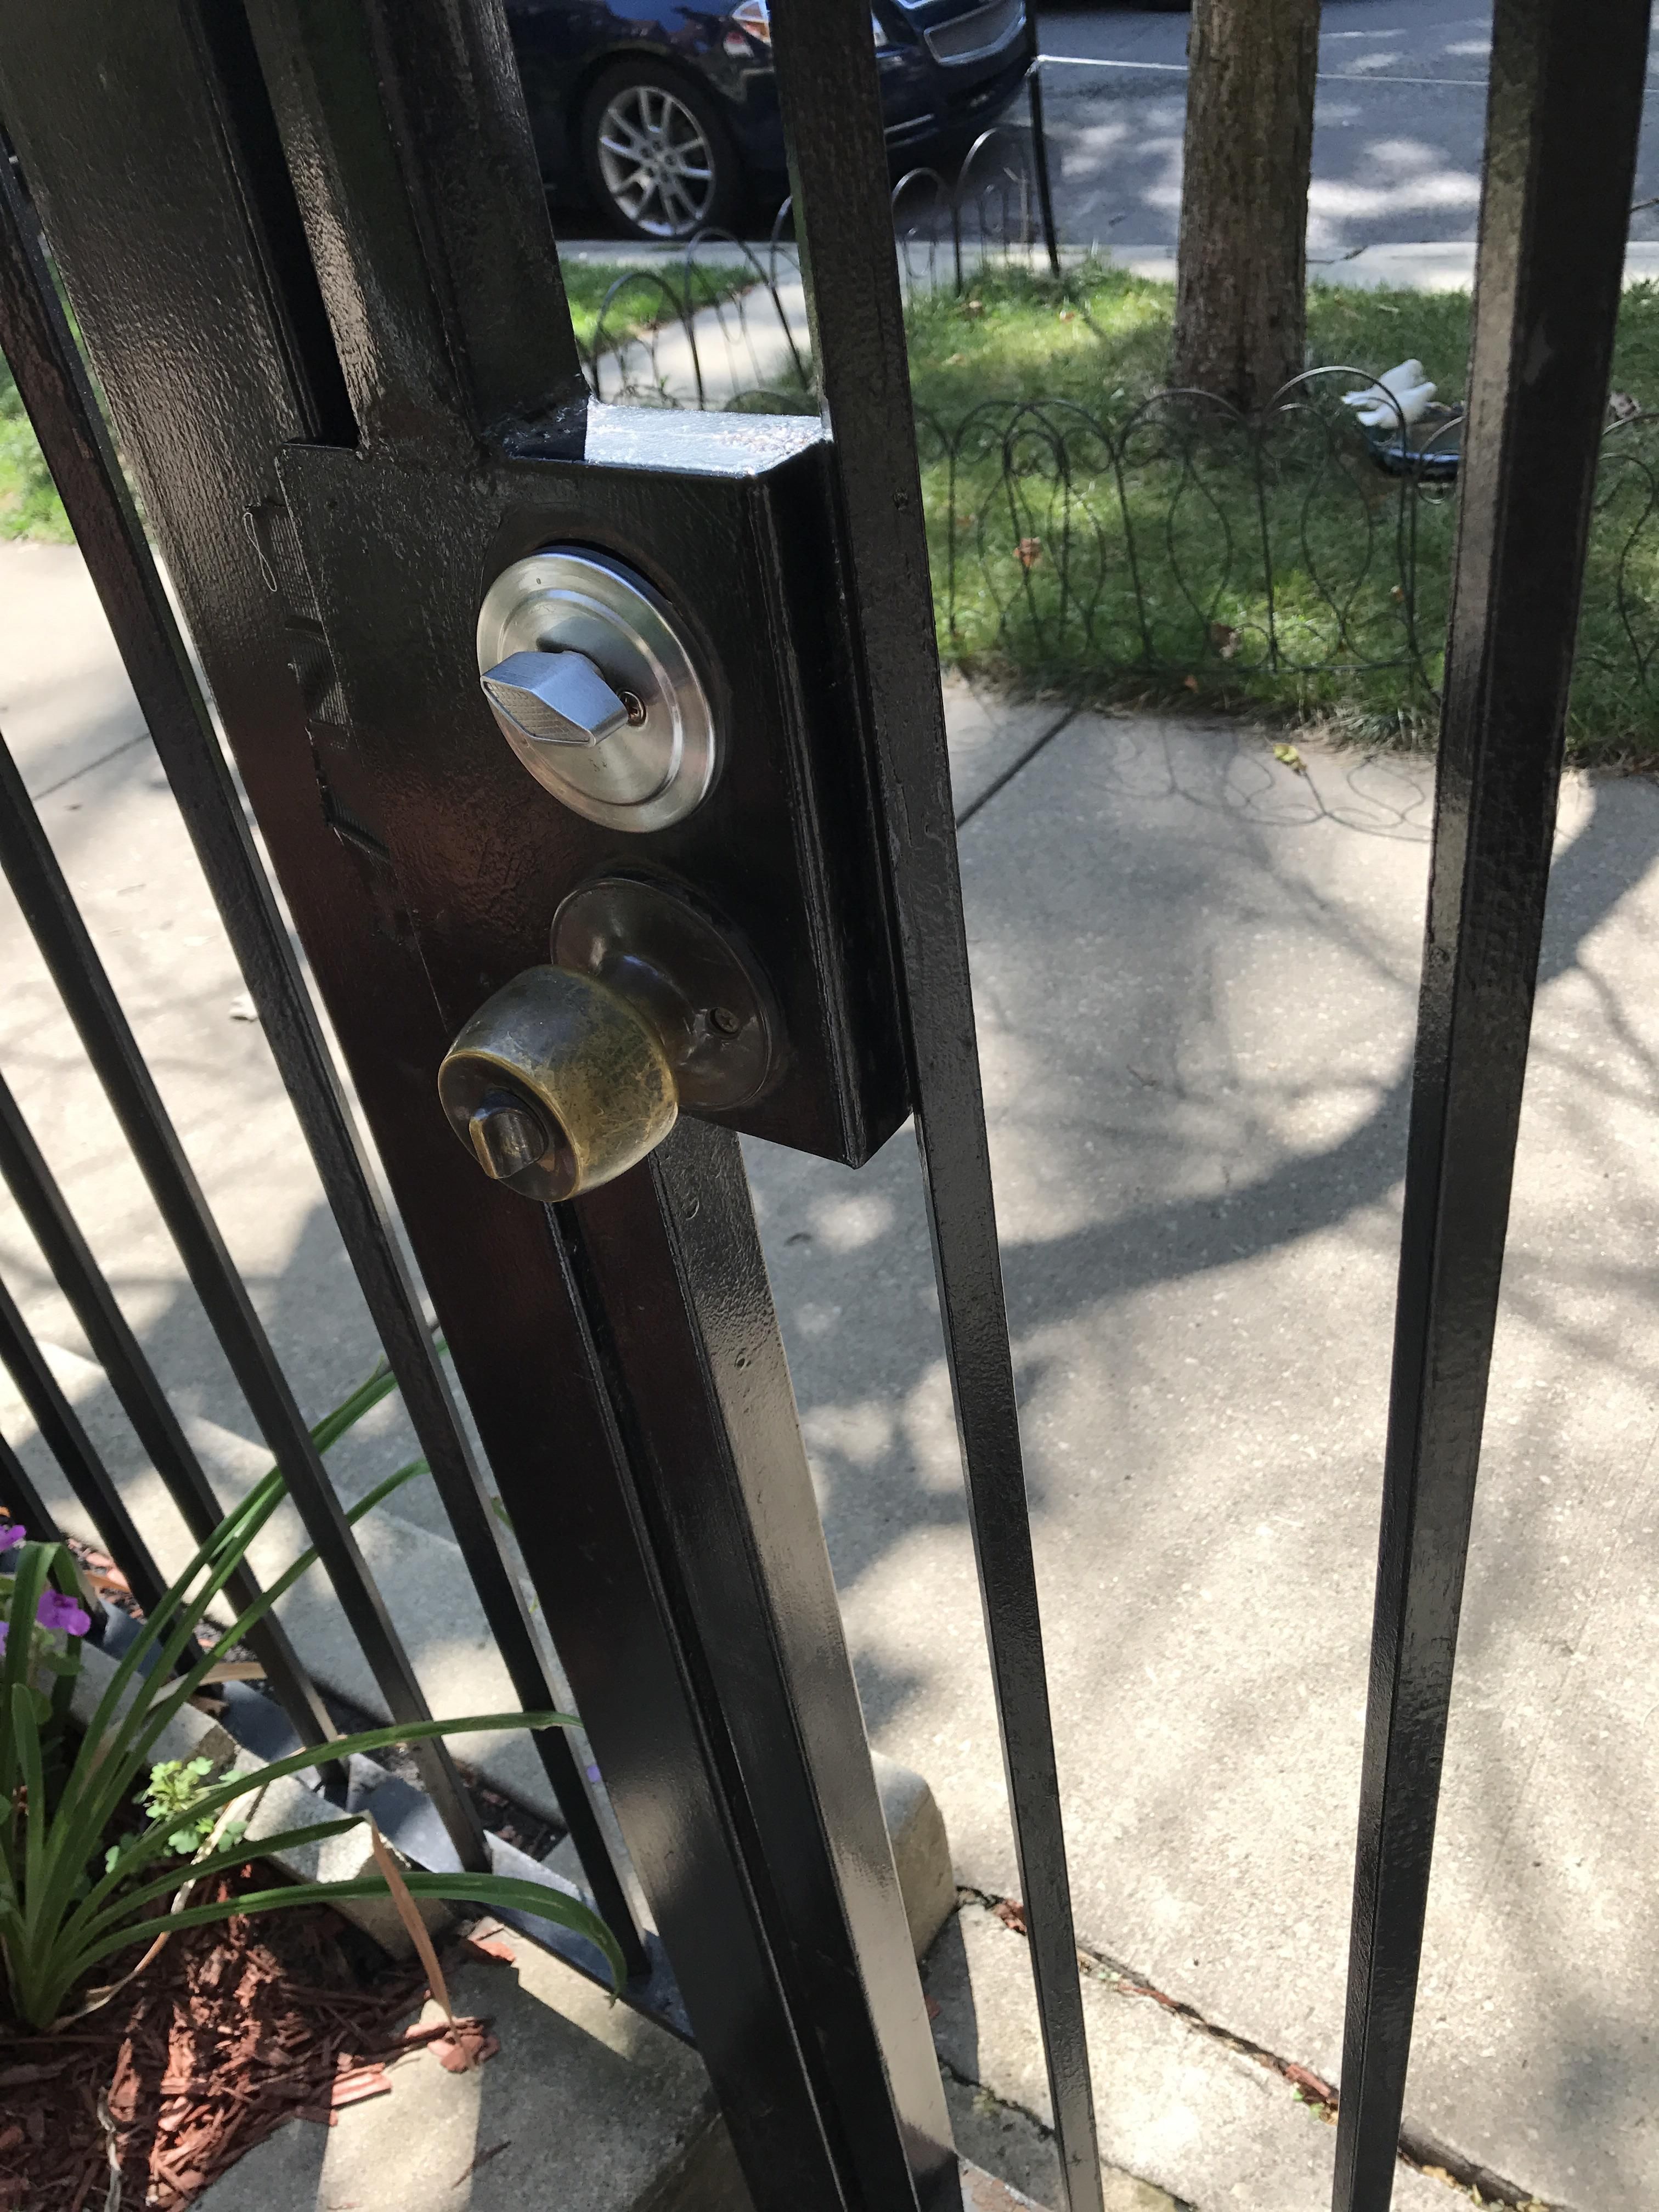 AirB&B host told me to be sure to lock the front gate.